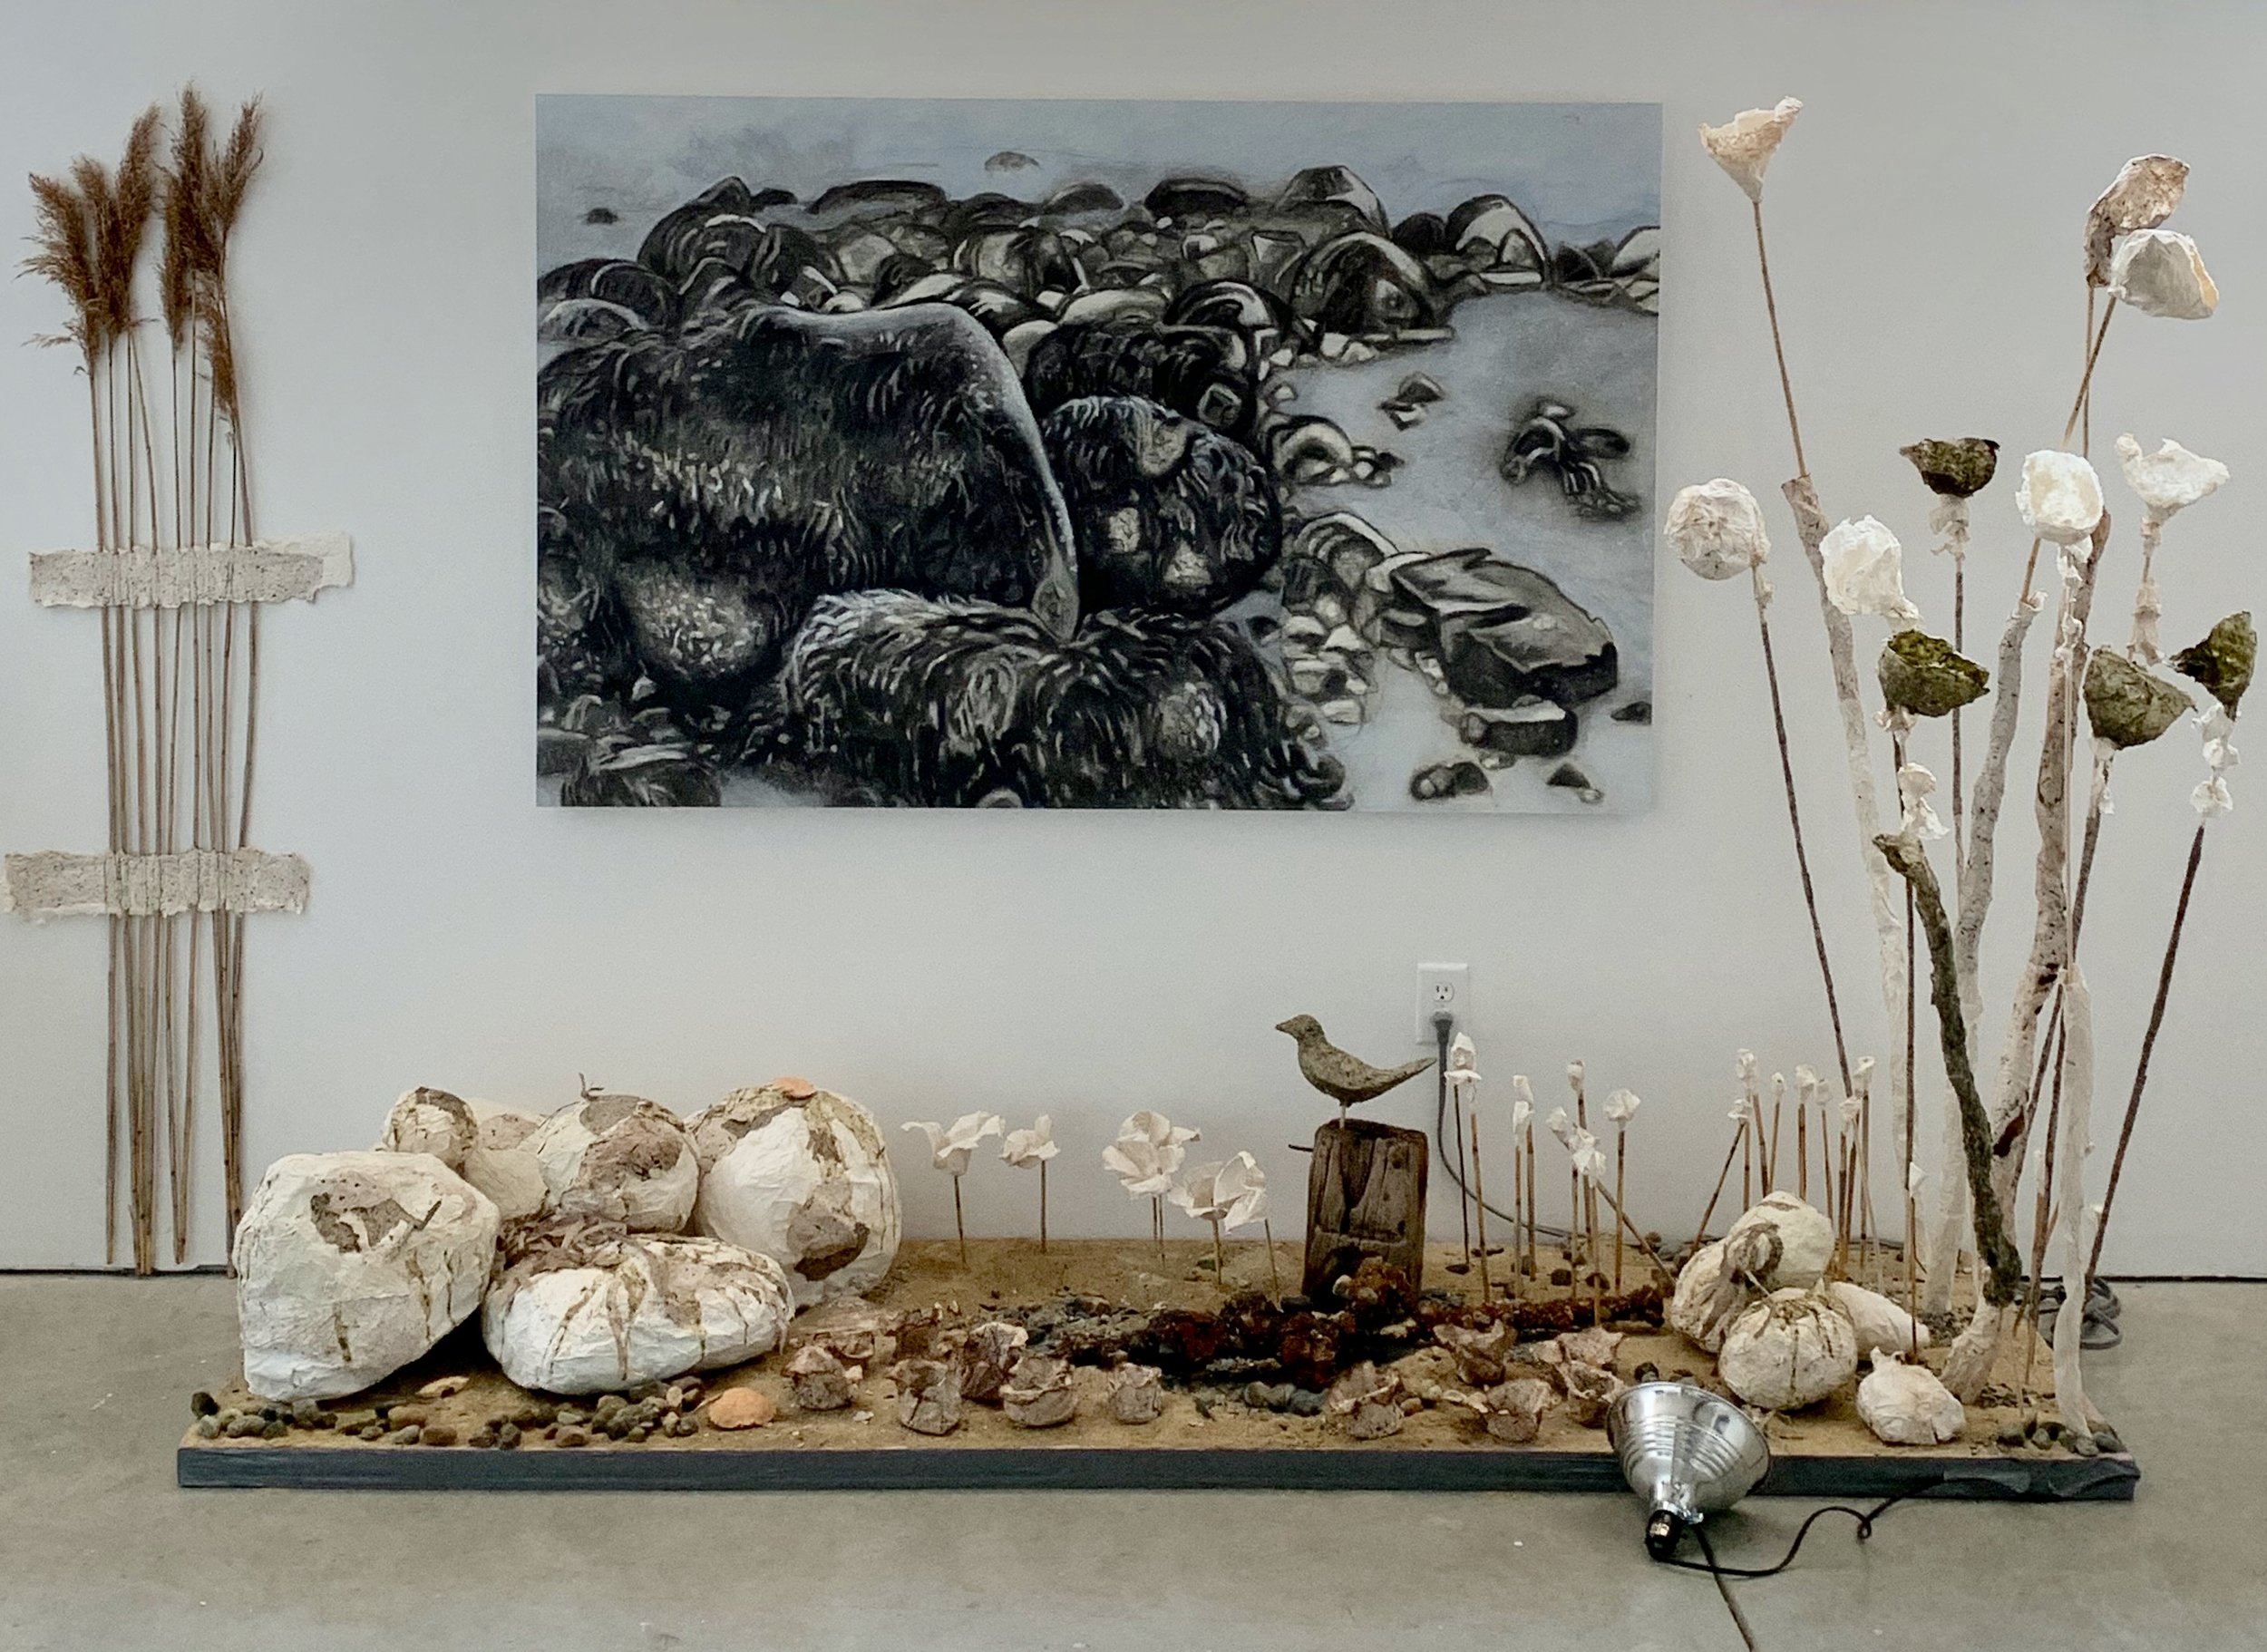  Installation shot, Galatea Fine Art, Boston  Sea Rock Sculpture Garden .  Handmade paper from seaweed, abaca and cotton pulp with charcoal drawing in background, rocks, sand, reeds, pebbles, and found objects on fiberglass insulation. 2019 